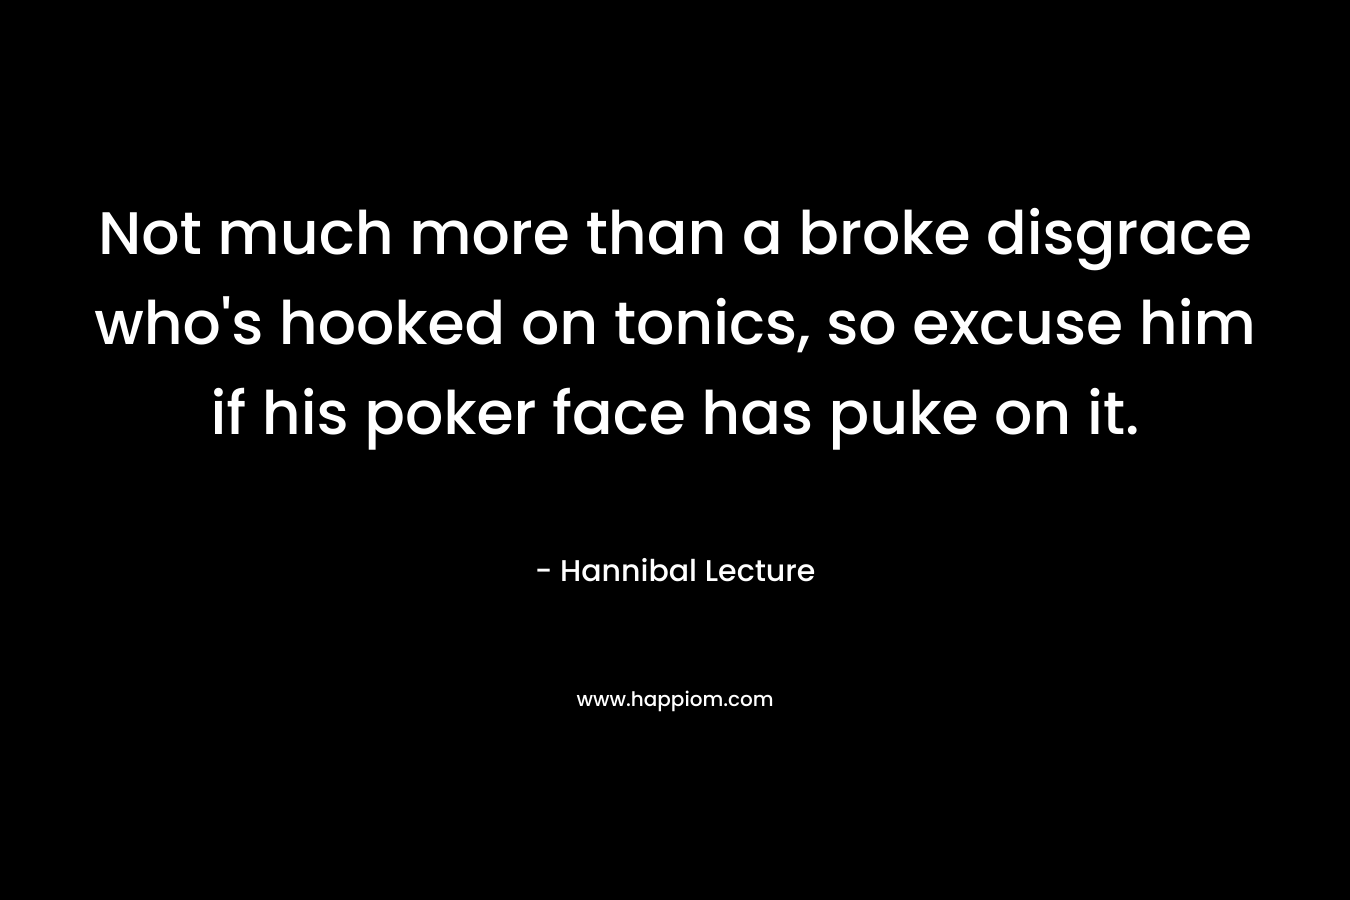 Not much more than a broke disgrace who’s hooked on tonics, so excuse him if his poker face has puke on it. – Hannibal Lecture